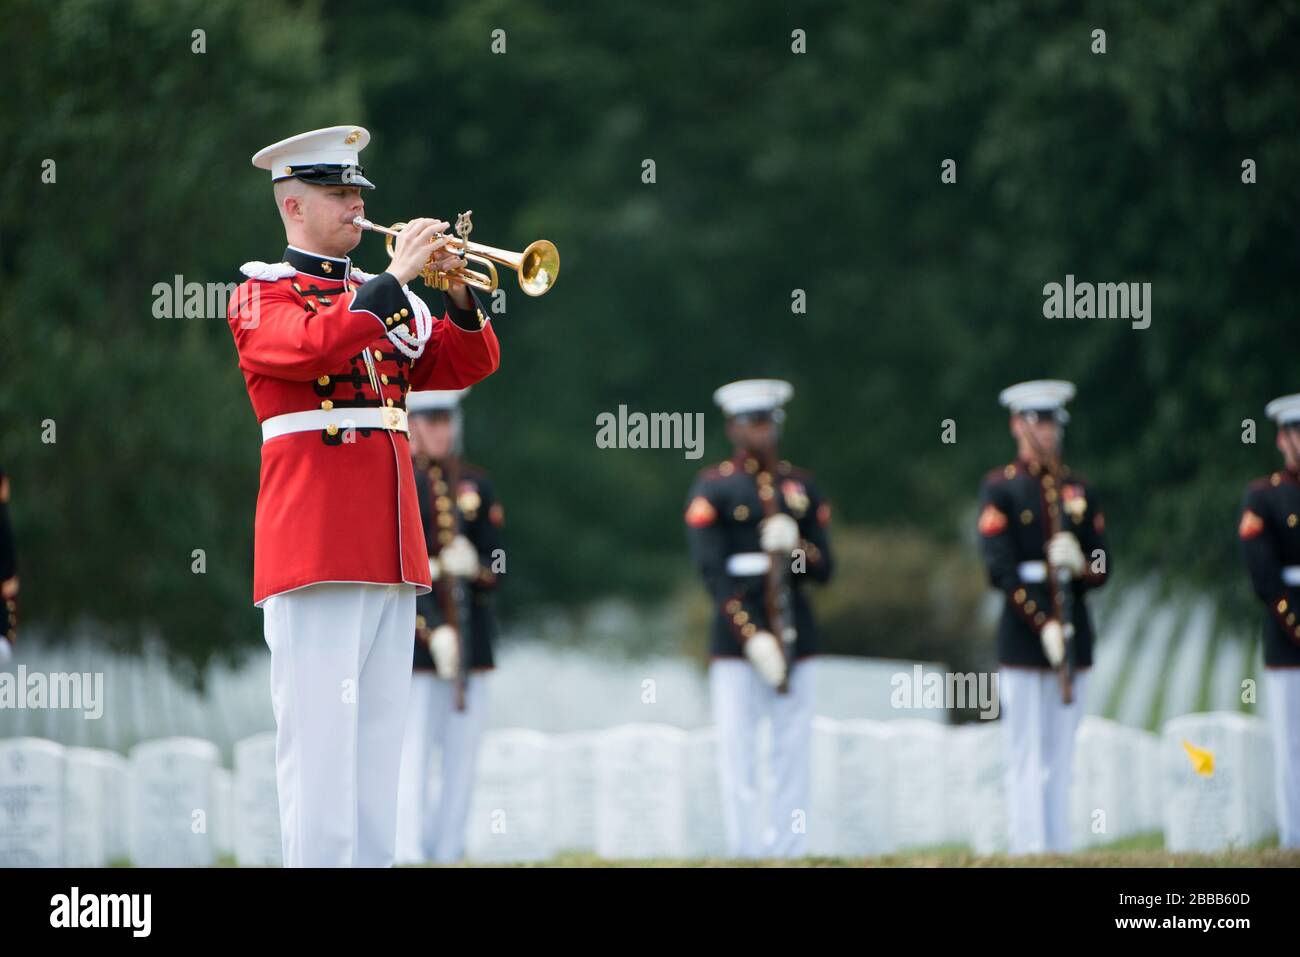 'Members of the U.S. Marine Corps participate in the graveside service for U.S. Marine Corps Pfc. Anthony Brozyna in Section 60 of Arlington National Cemetery, Aug. 31, 2016, in Arlington, Va. Brozyna, of Hartford, Connecticut, died Nov. 20, 1943 during the battle of Tarawa. His remains were recently recovered and identified. (U.S. Army photo by Rachel Larue/Arlington National Cemetery/released); 31 August 2016, 13:06; Graveside service for U.S. Marine Corps Pfc. Anthony Brozyna in Section 60 of Arlington National Cemetery; Arlington National Cemetery; ' Stock Photo